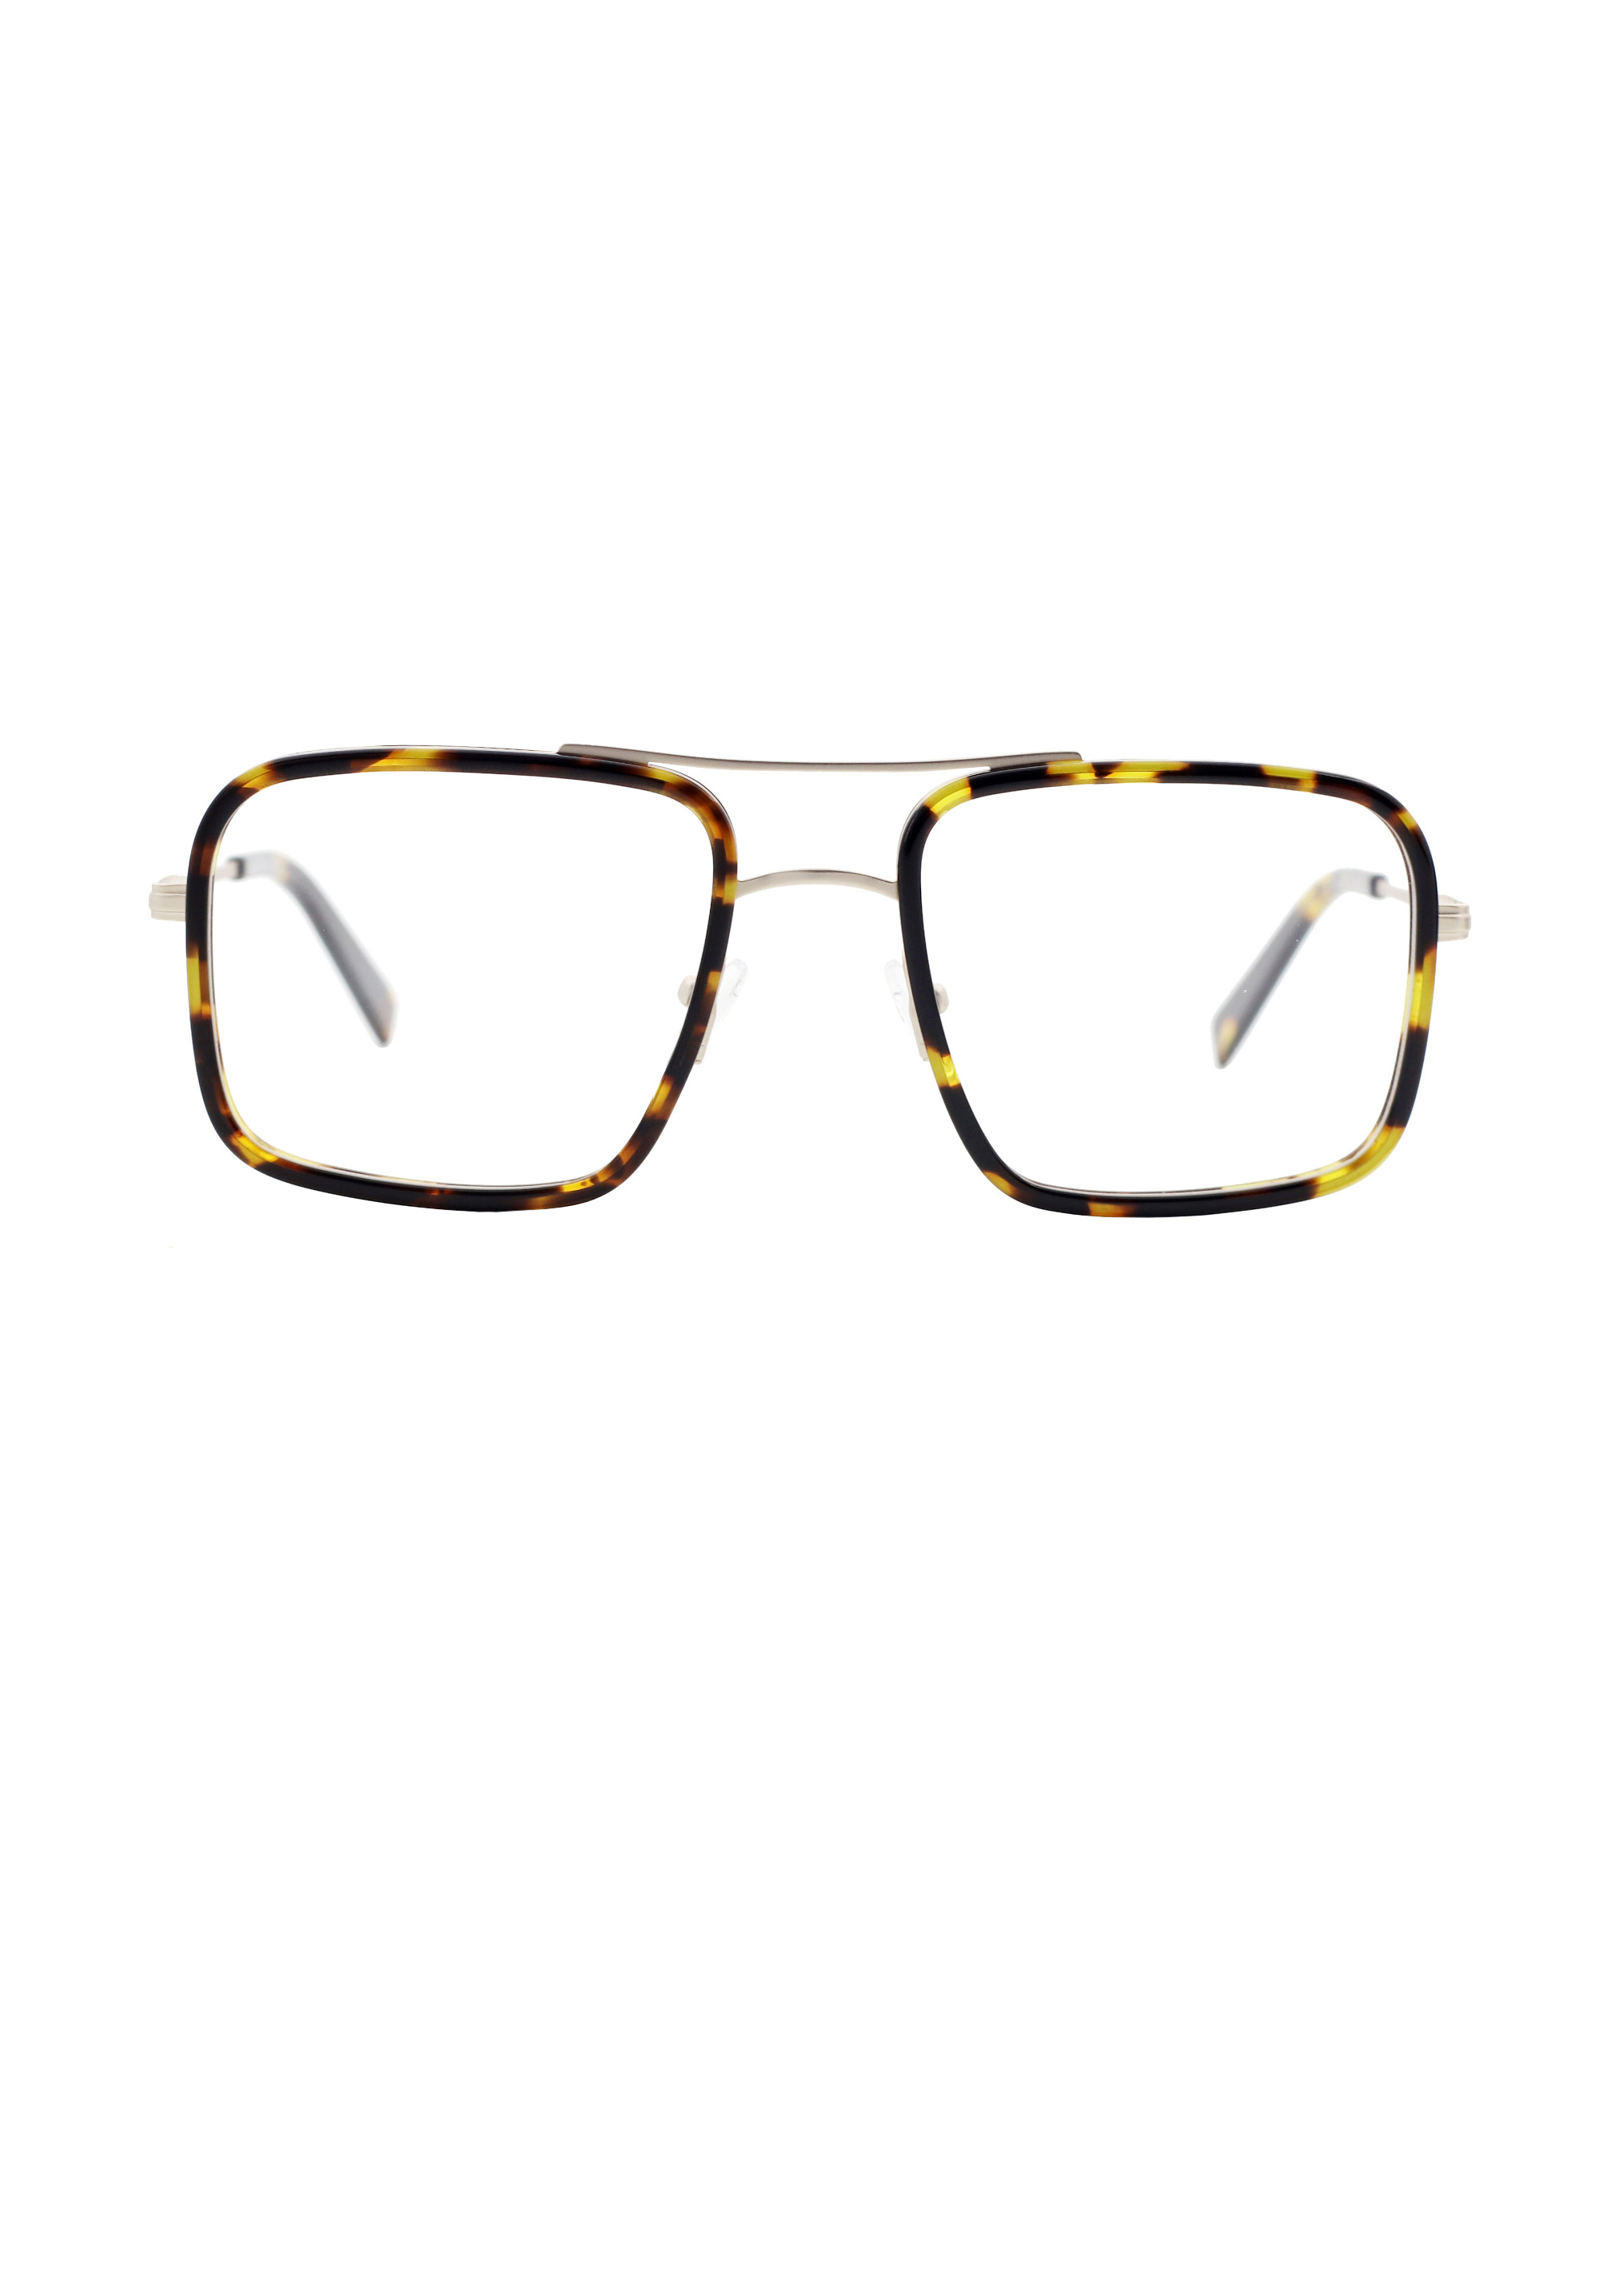 Men’s Square Optical Glasses Frame Featured Image